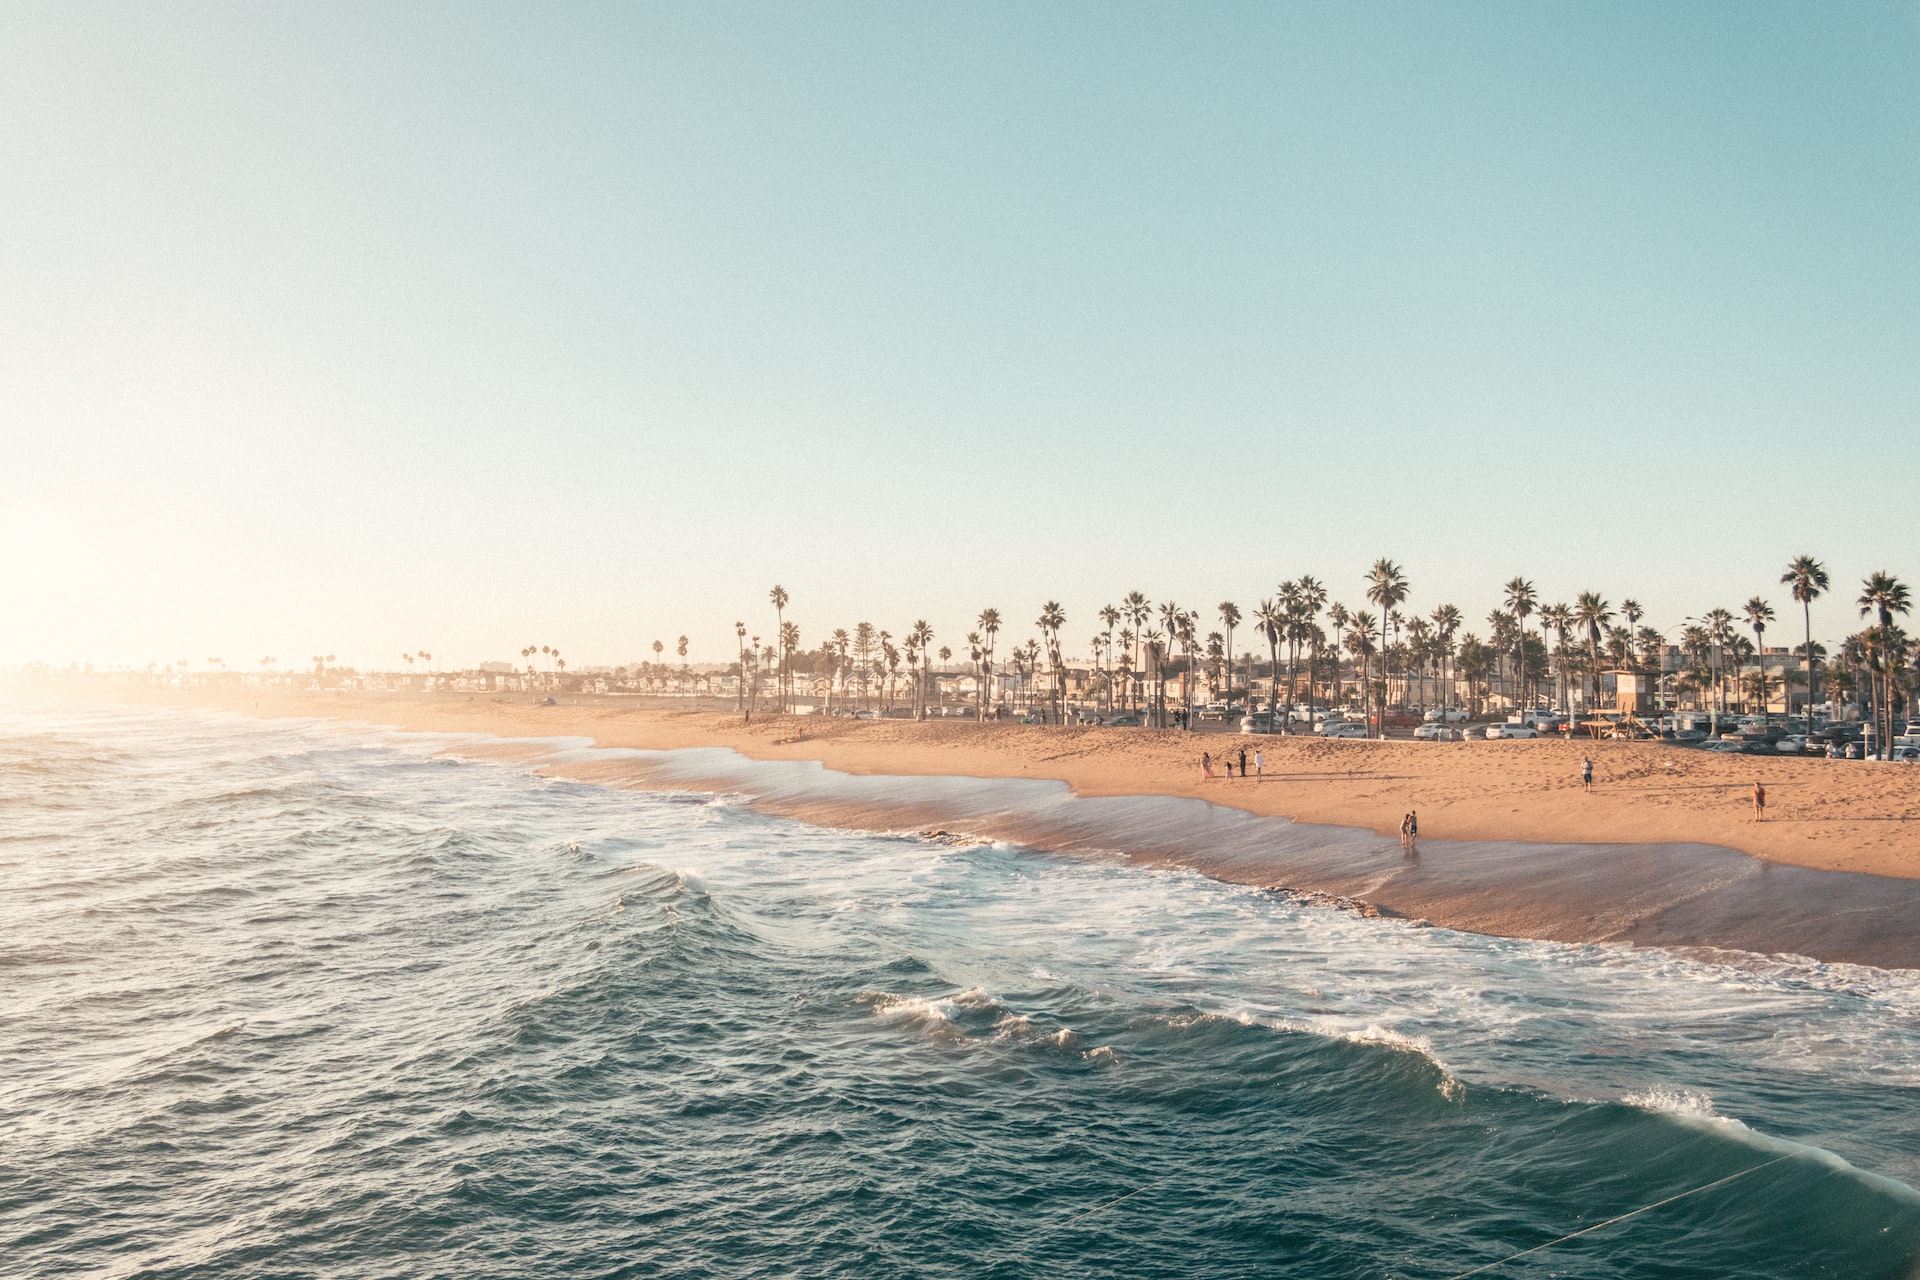 An immaculate looking beach in southern California.